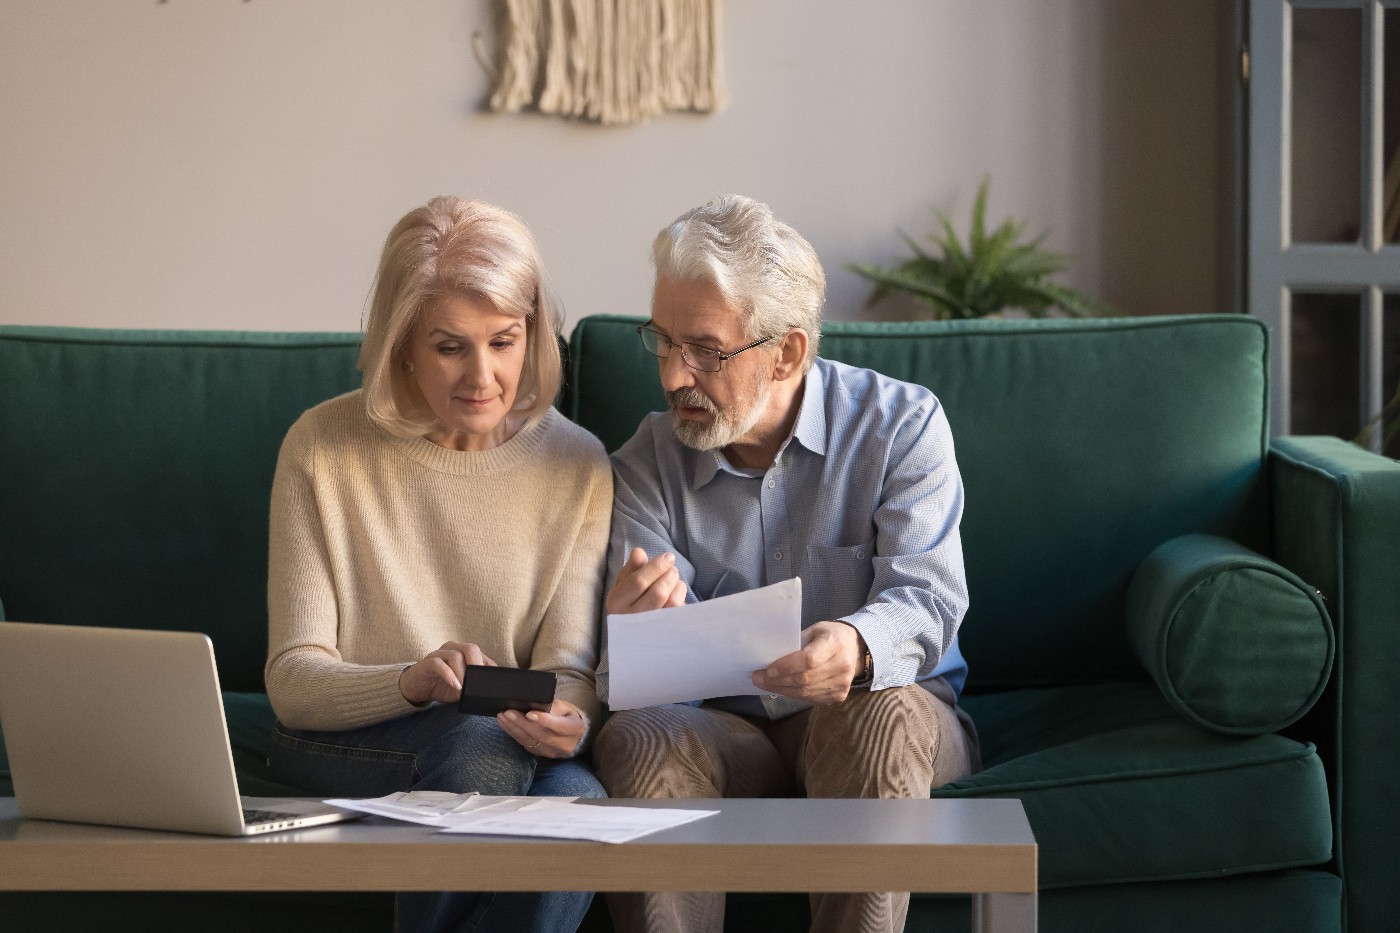 https://tickertapecdn.tdameritrade.com/assets/images/pages/md/Security in retirement: Guide to the SECURE Act